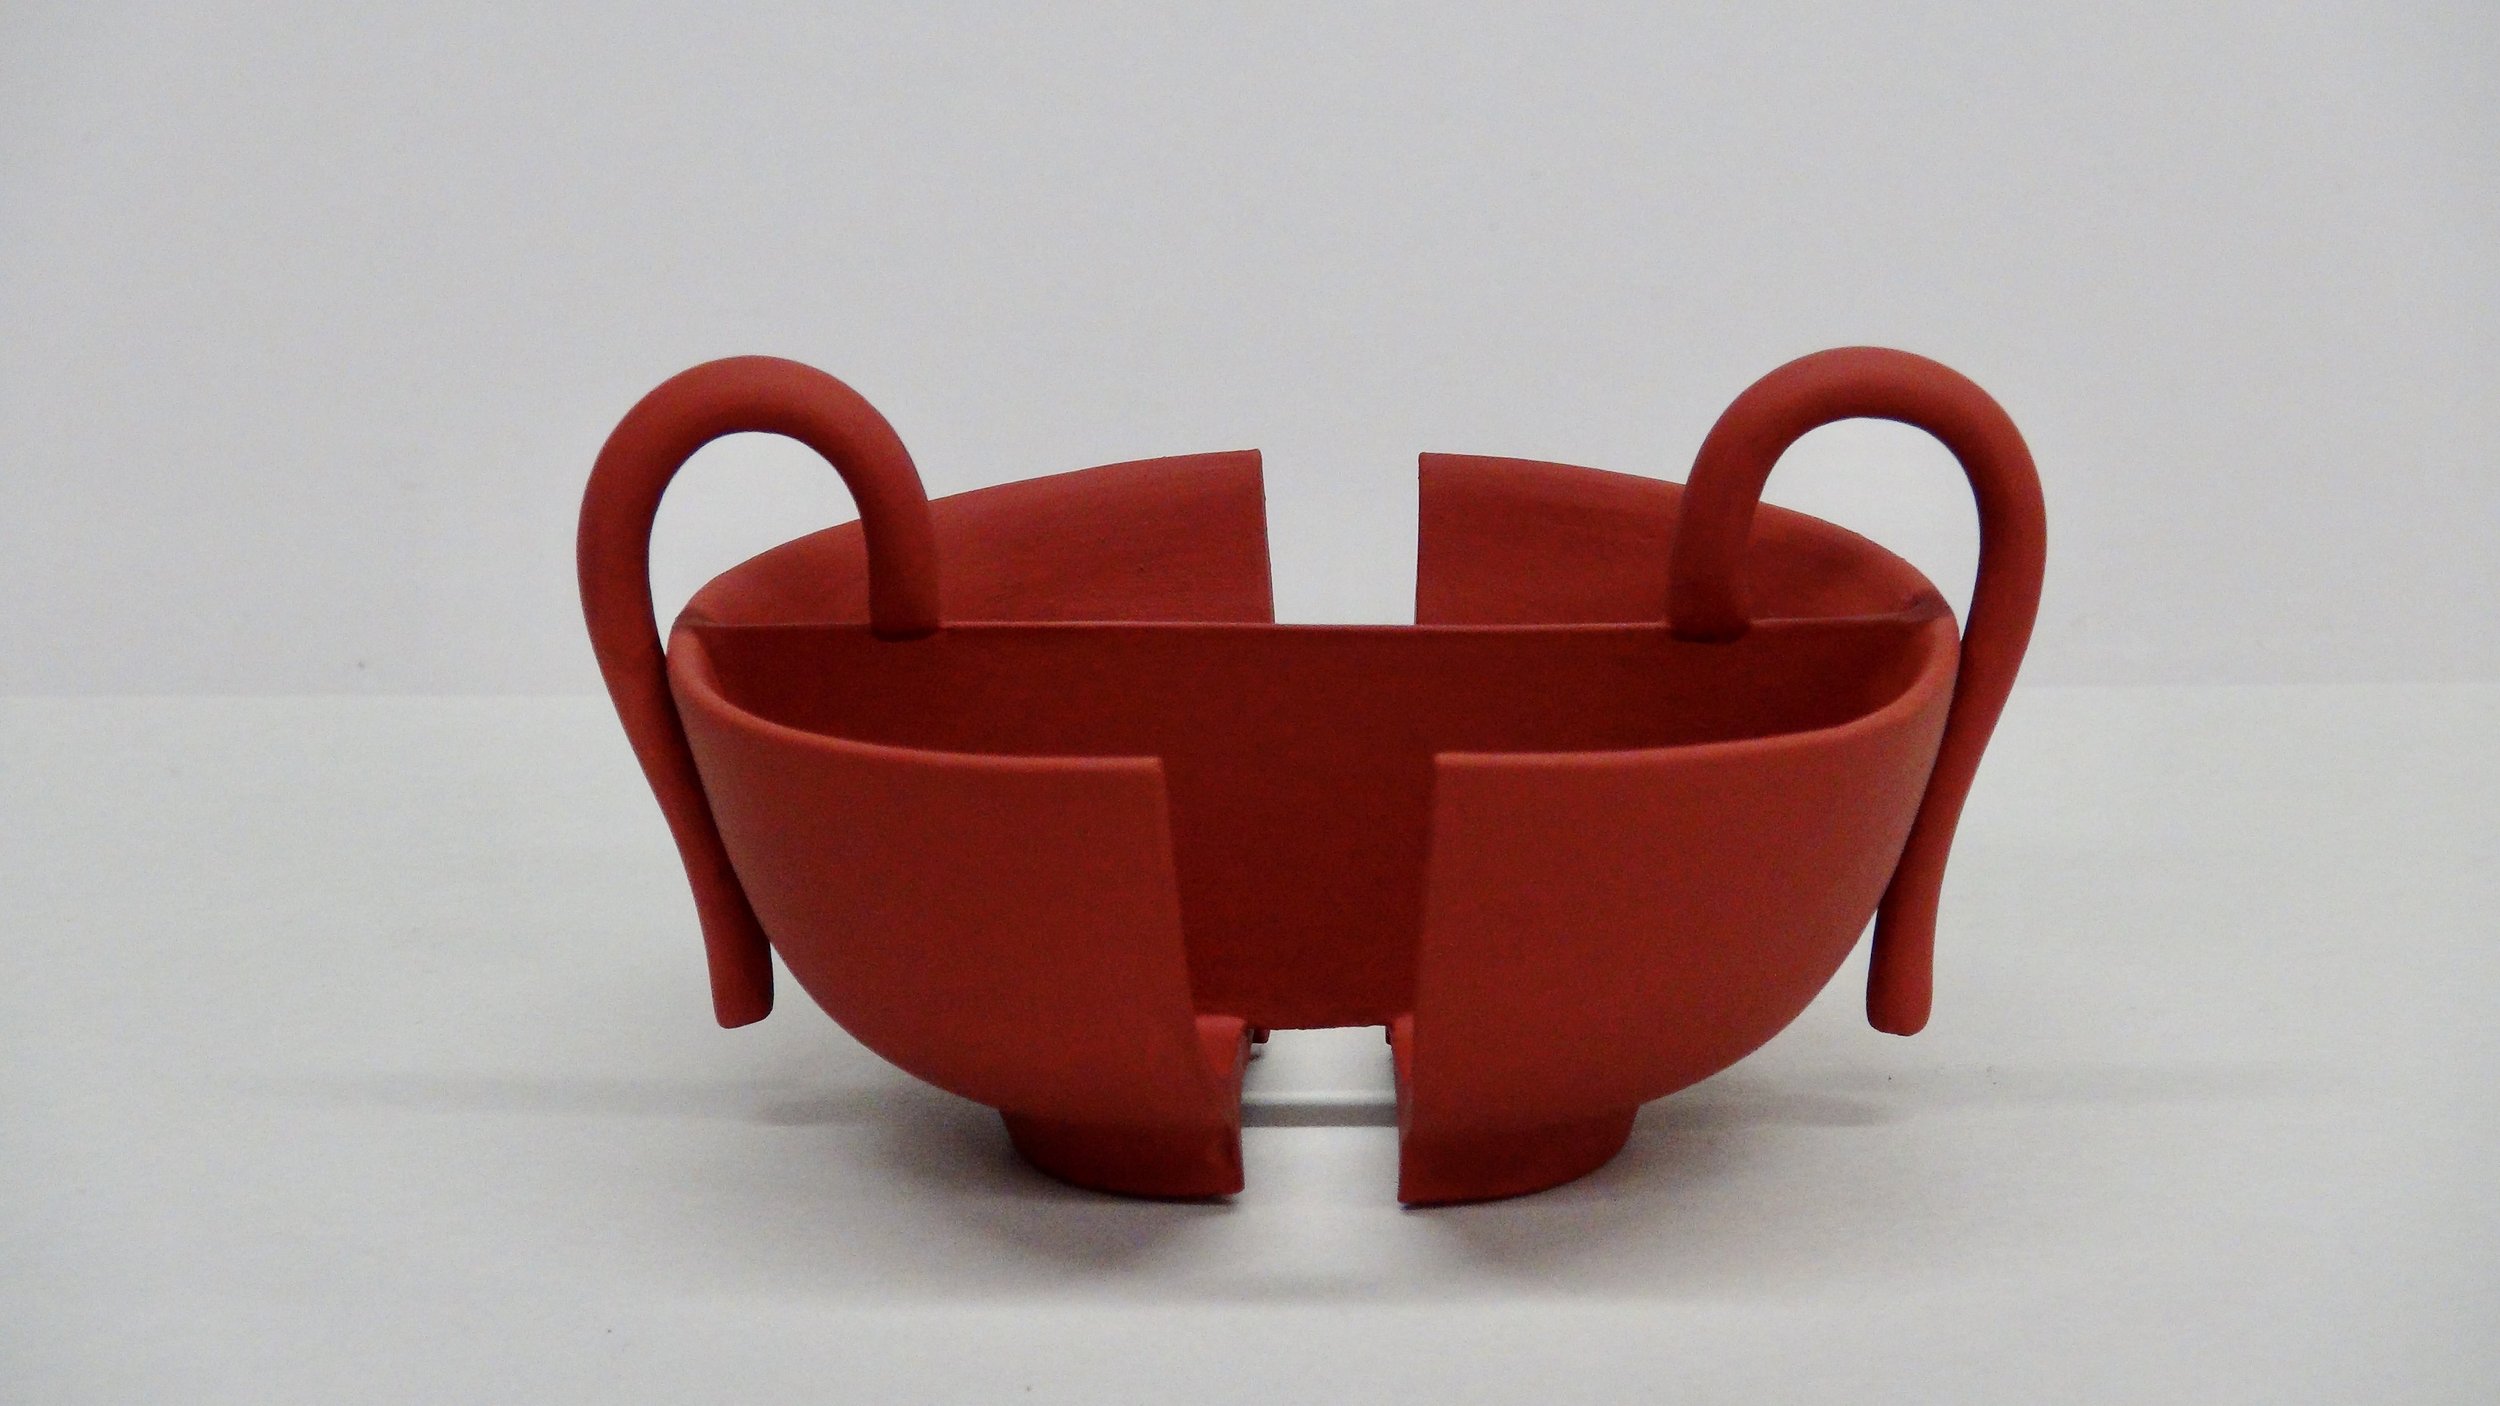  “Cut Cup, Red” was an early favorite:  non-functional, but clearly a vessel, retaining a sense of “cupness.” 